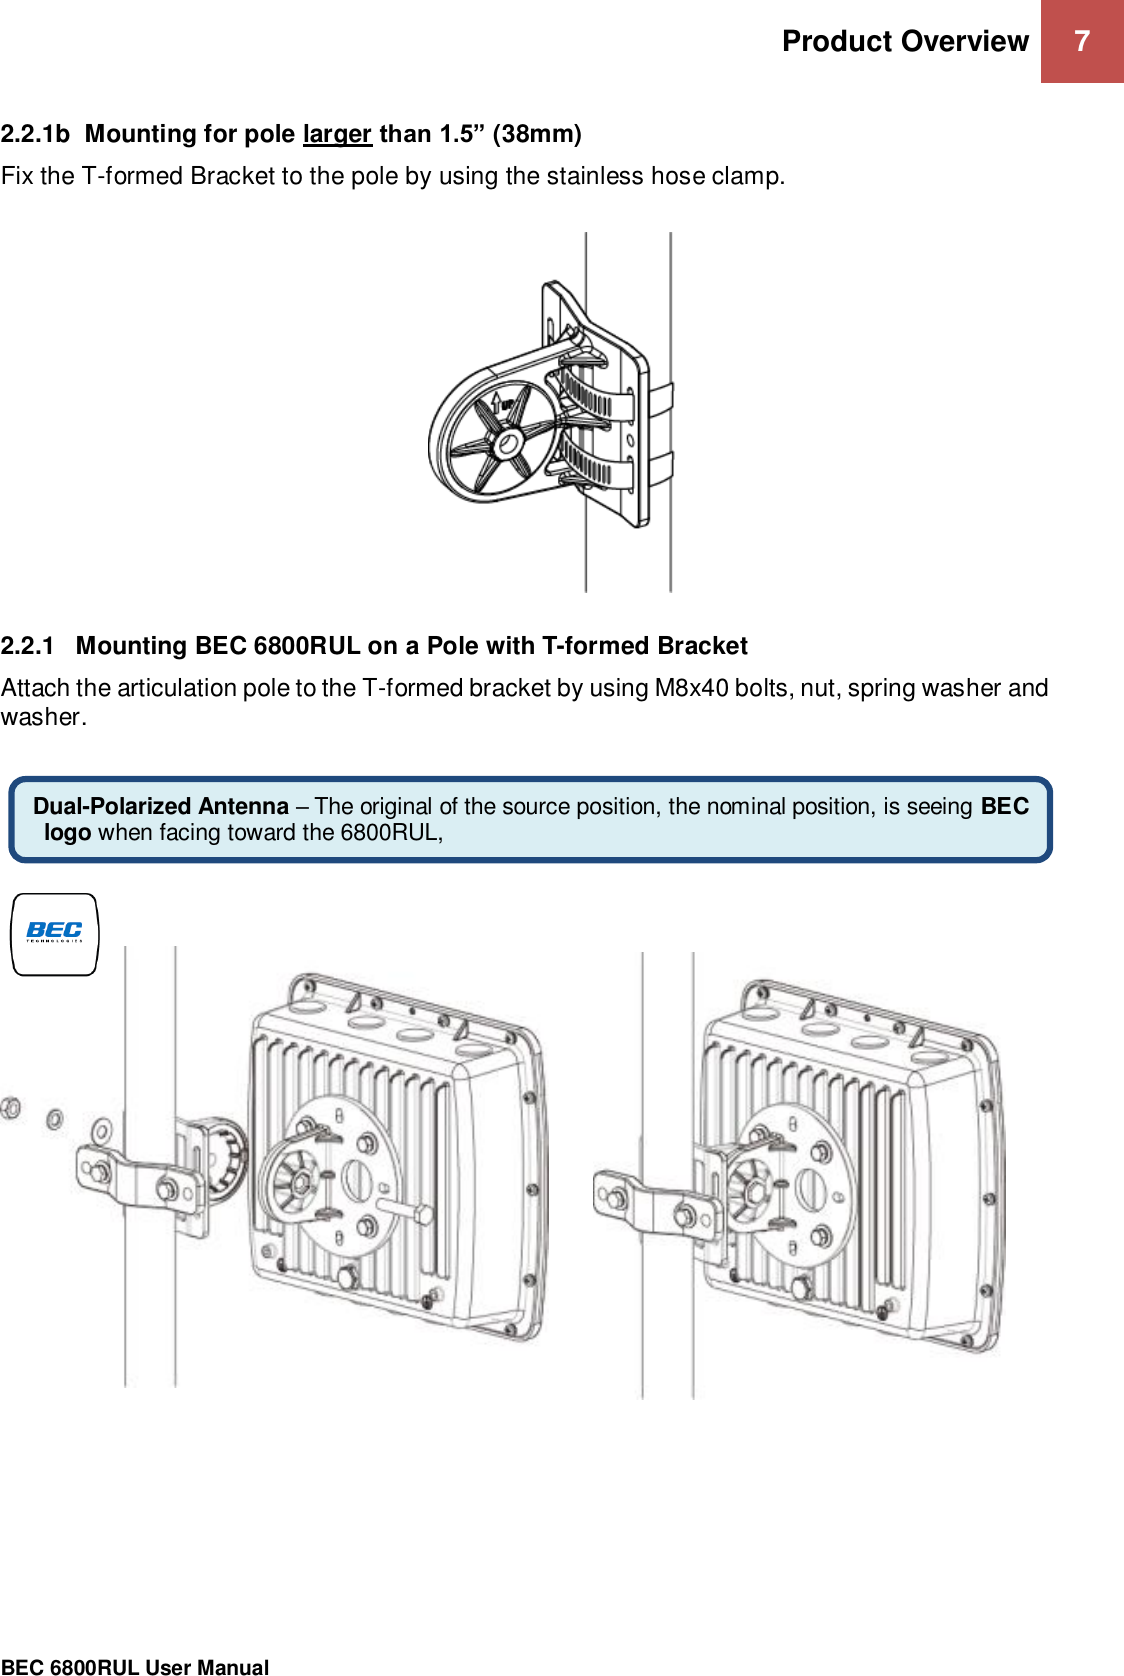 Product Overview 7                                                 BEC 6800RUL User Manual  2.2.1b  Mounting for pole larger than 1.5” (38mm) Fix the T-formed Bracket to the pole by using the stainless hose clamp.       2.2.1  Mounting BEC 6800RUL on a Pole with T-formed Bracket Attach the articulation pole to the T-formed bracket by using M8x40 bolts, nut, spring washer and washer.                                      Dual-Polarized Antenna – The original of the source position, the nominal position, is seeing BEC logo when facing toward the 6800RUL,  